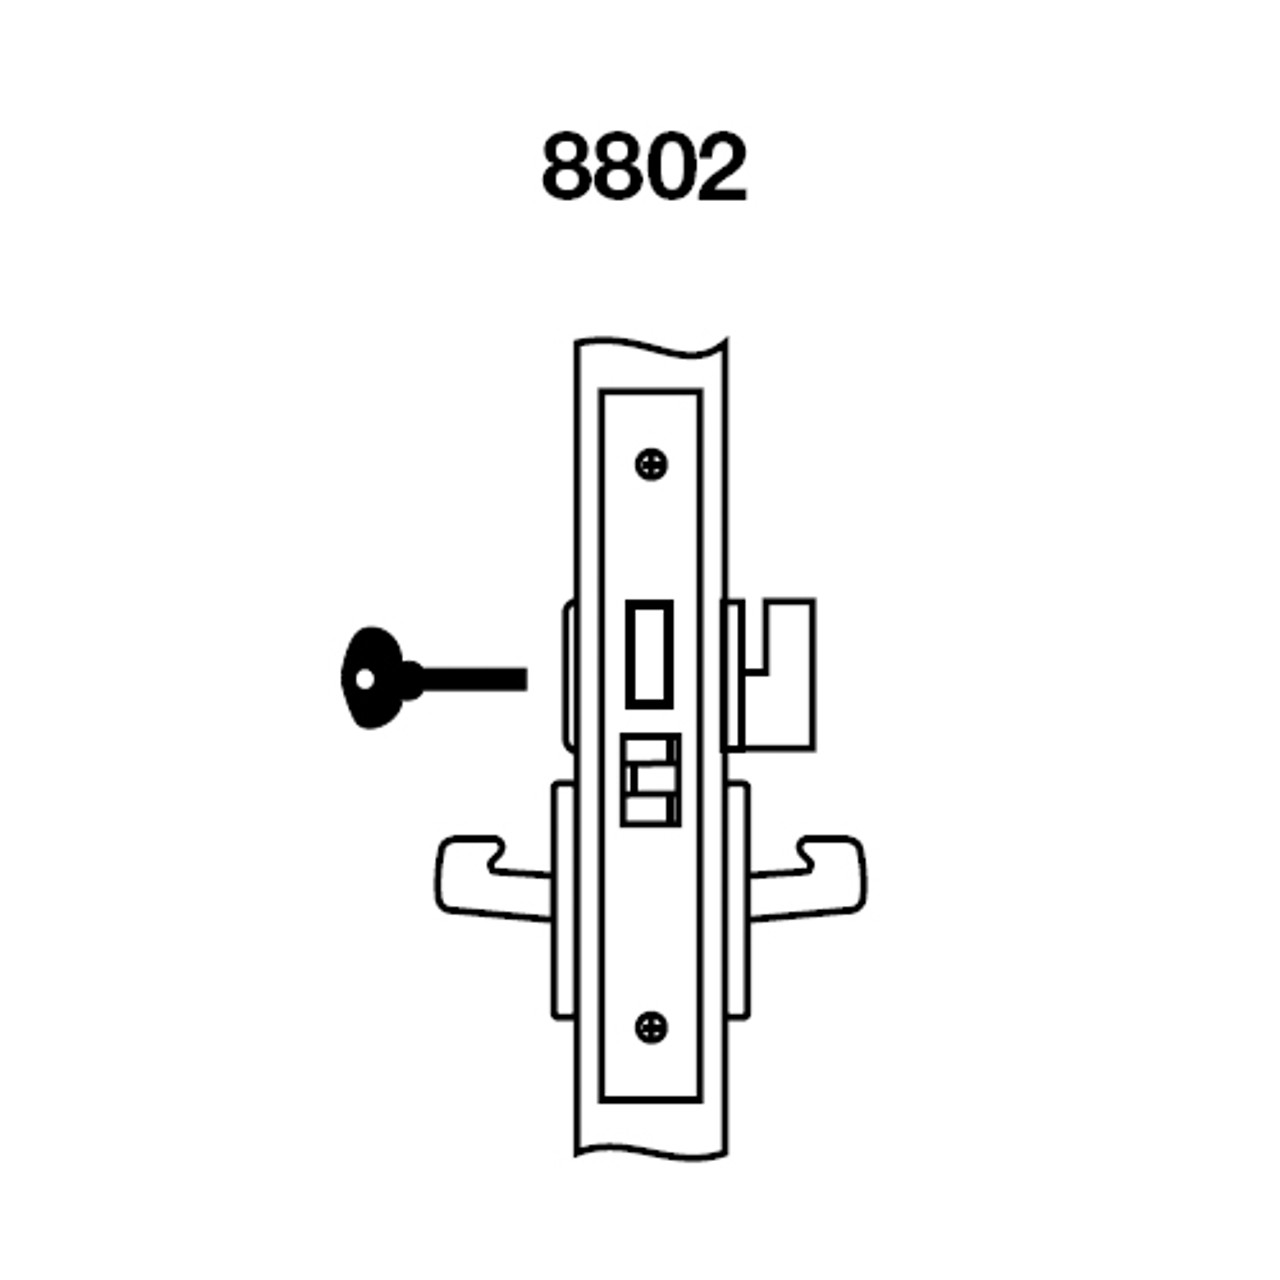 CRCN8802FL-618 Yale 8800FL Series Non-Keyed Mortise Privacy Locks with Carmel Lever in Bright Nickel